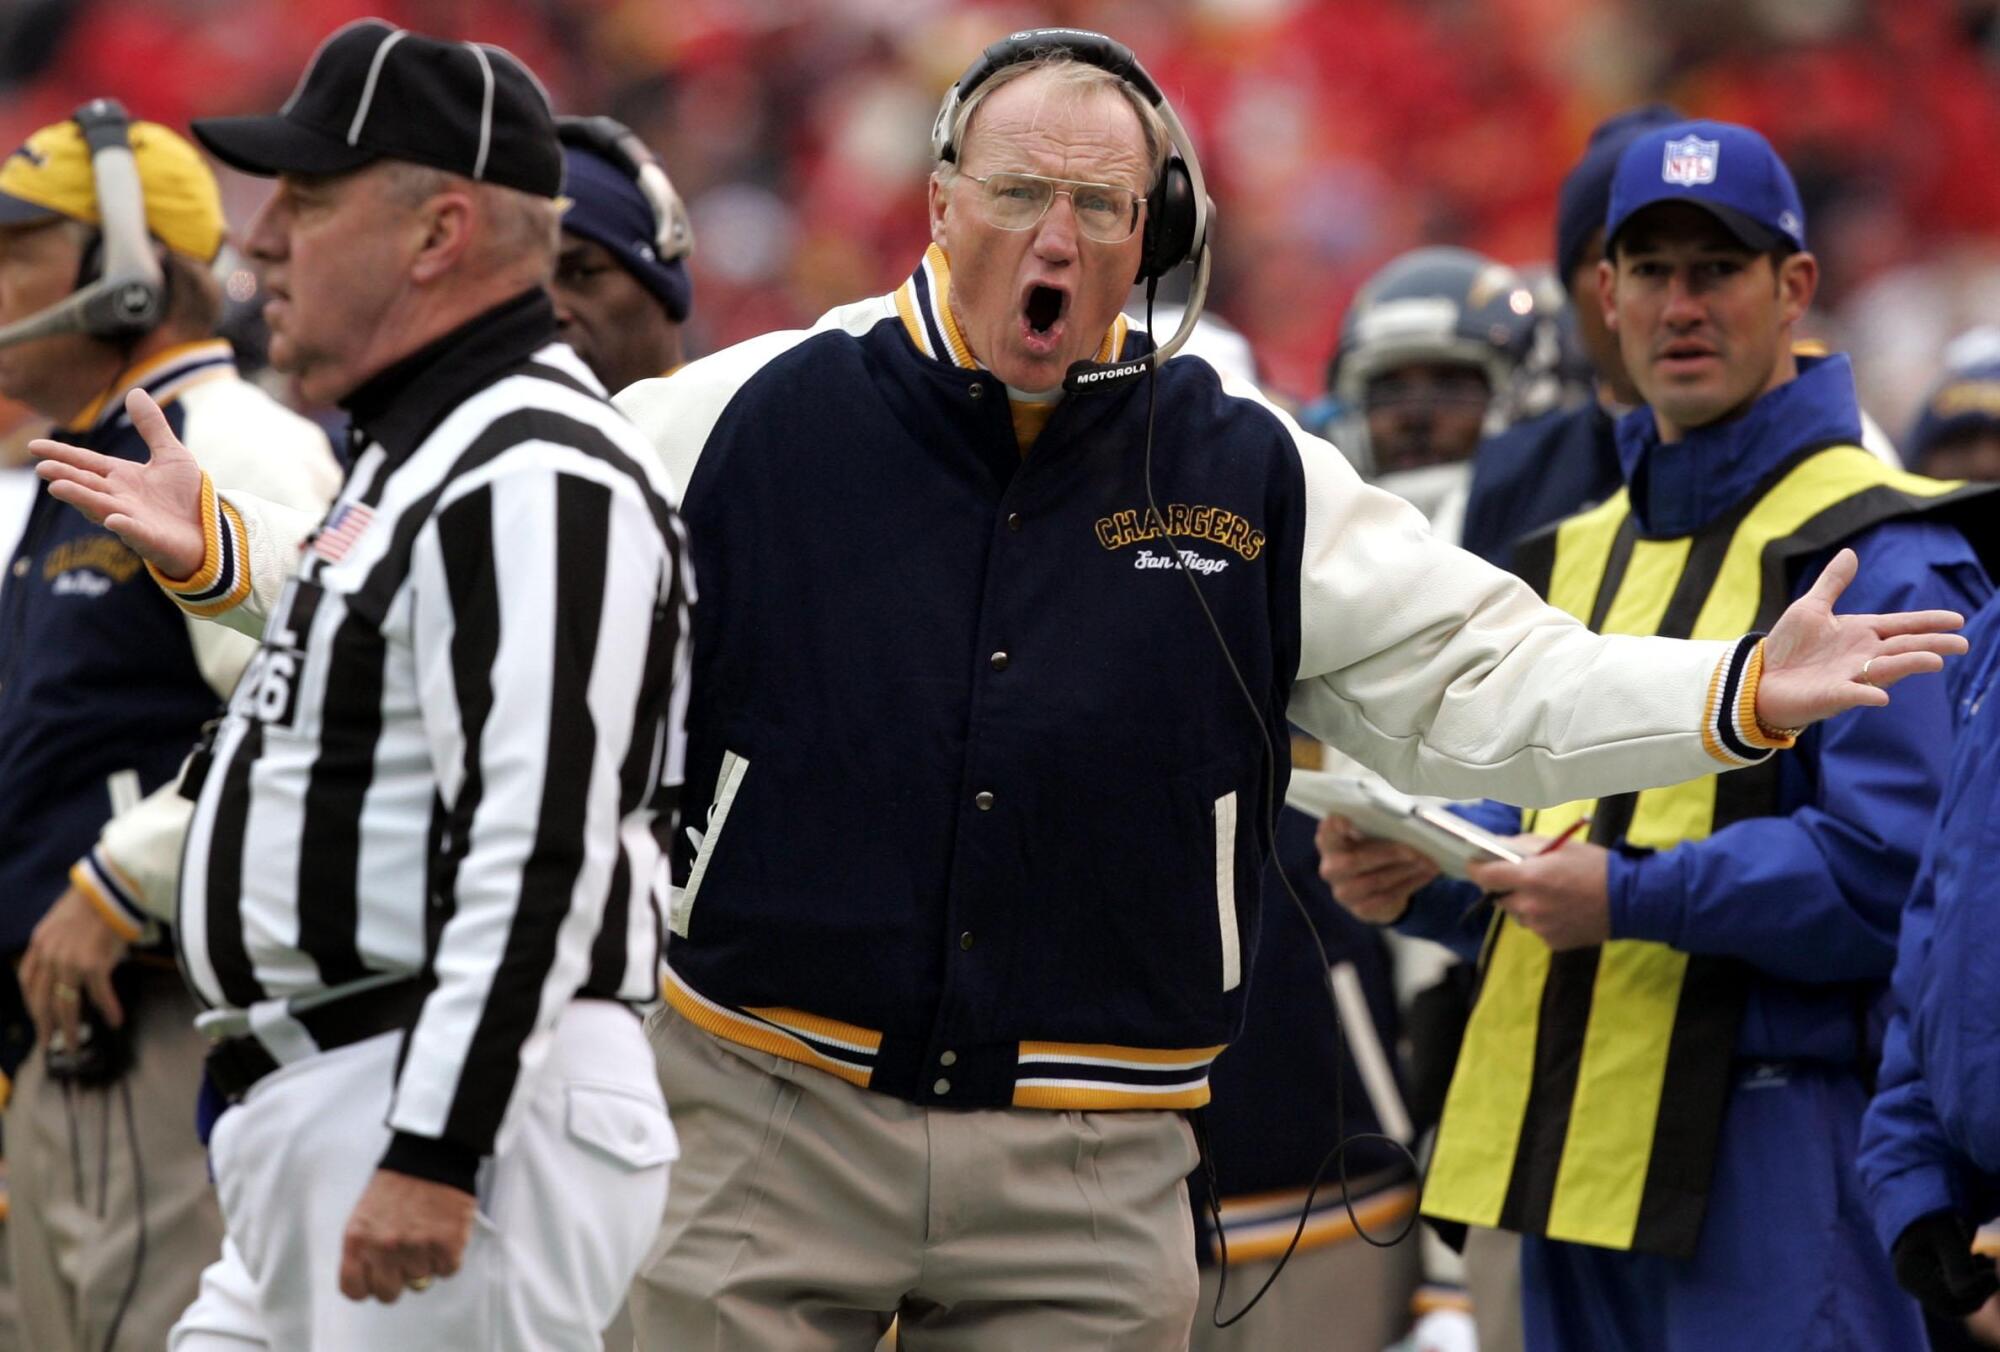 Photos: San Diego Chargers coach Marty Schottenheimer remembered - The San  Diego Union-Tribune